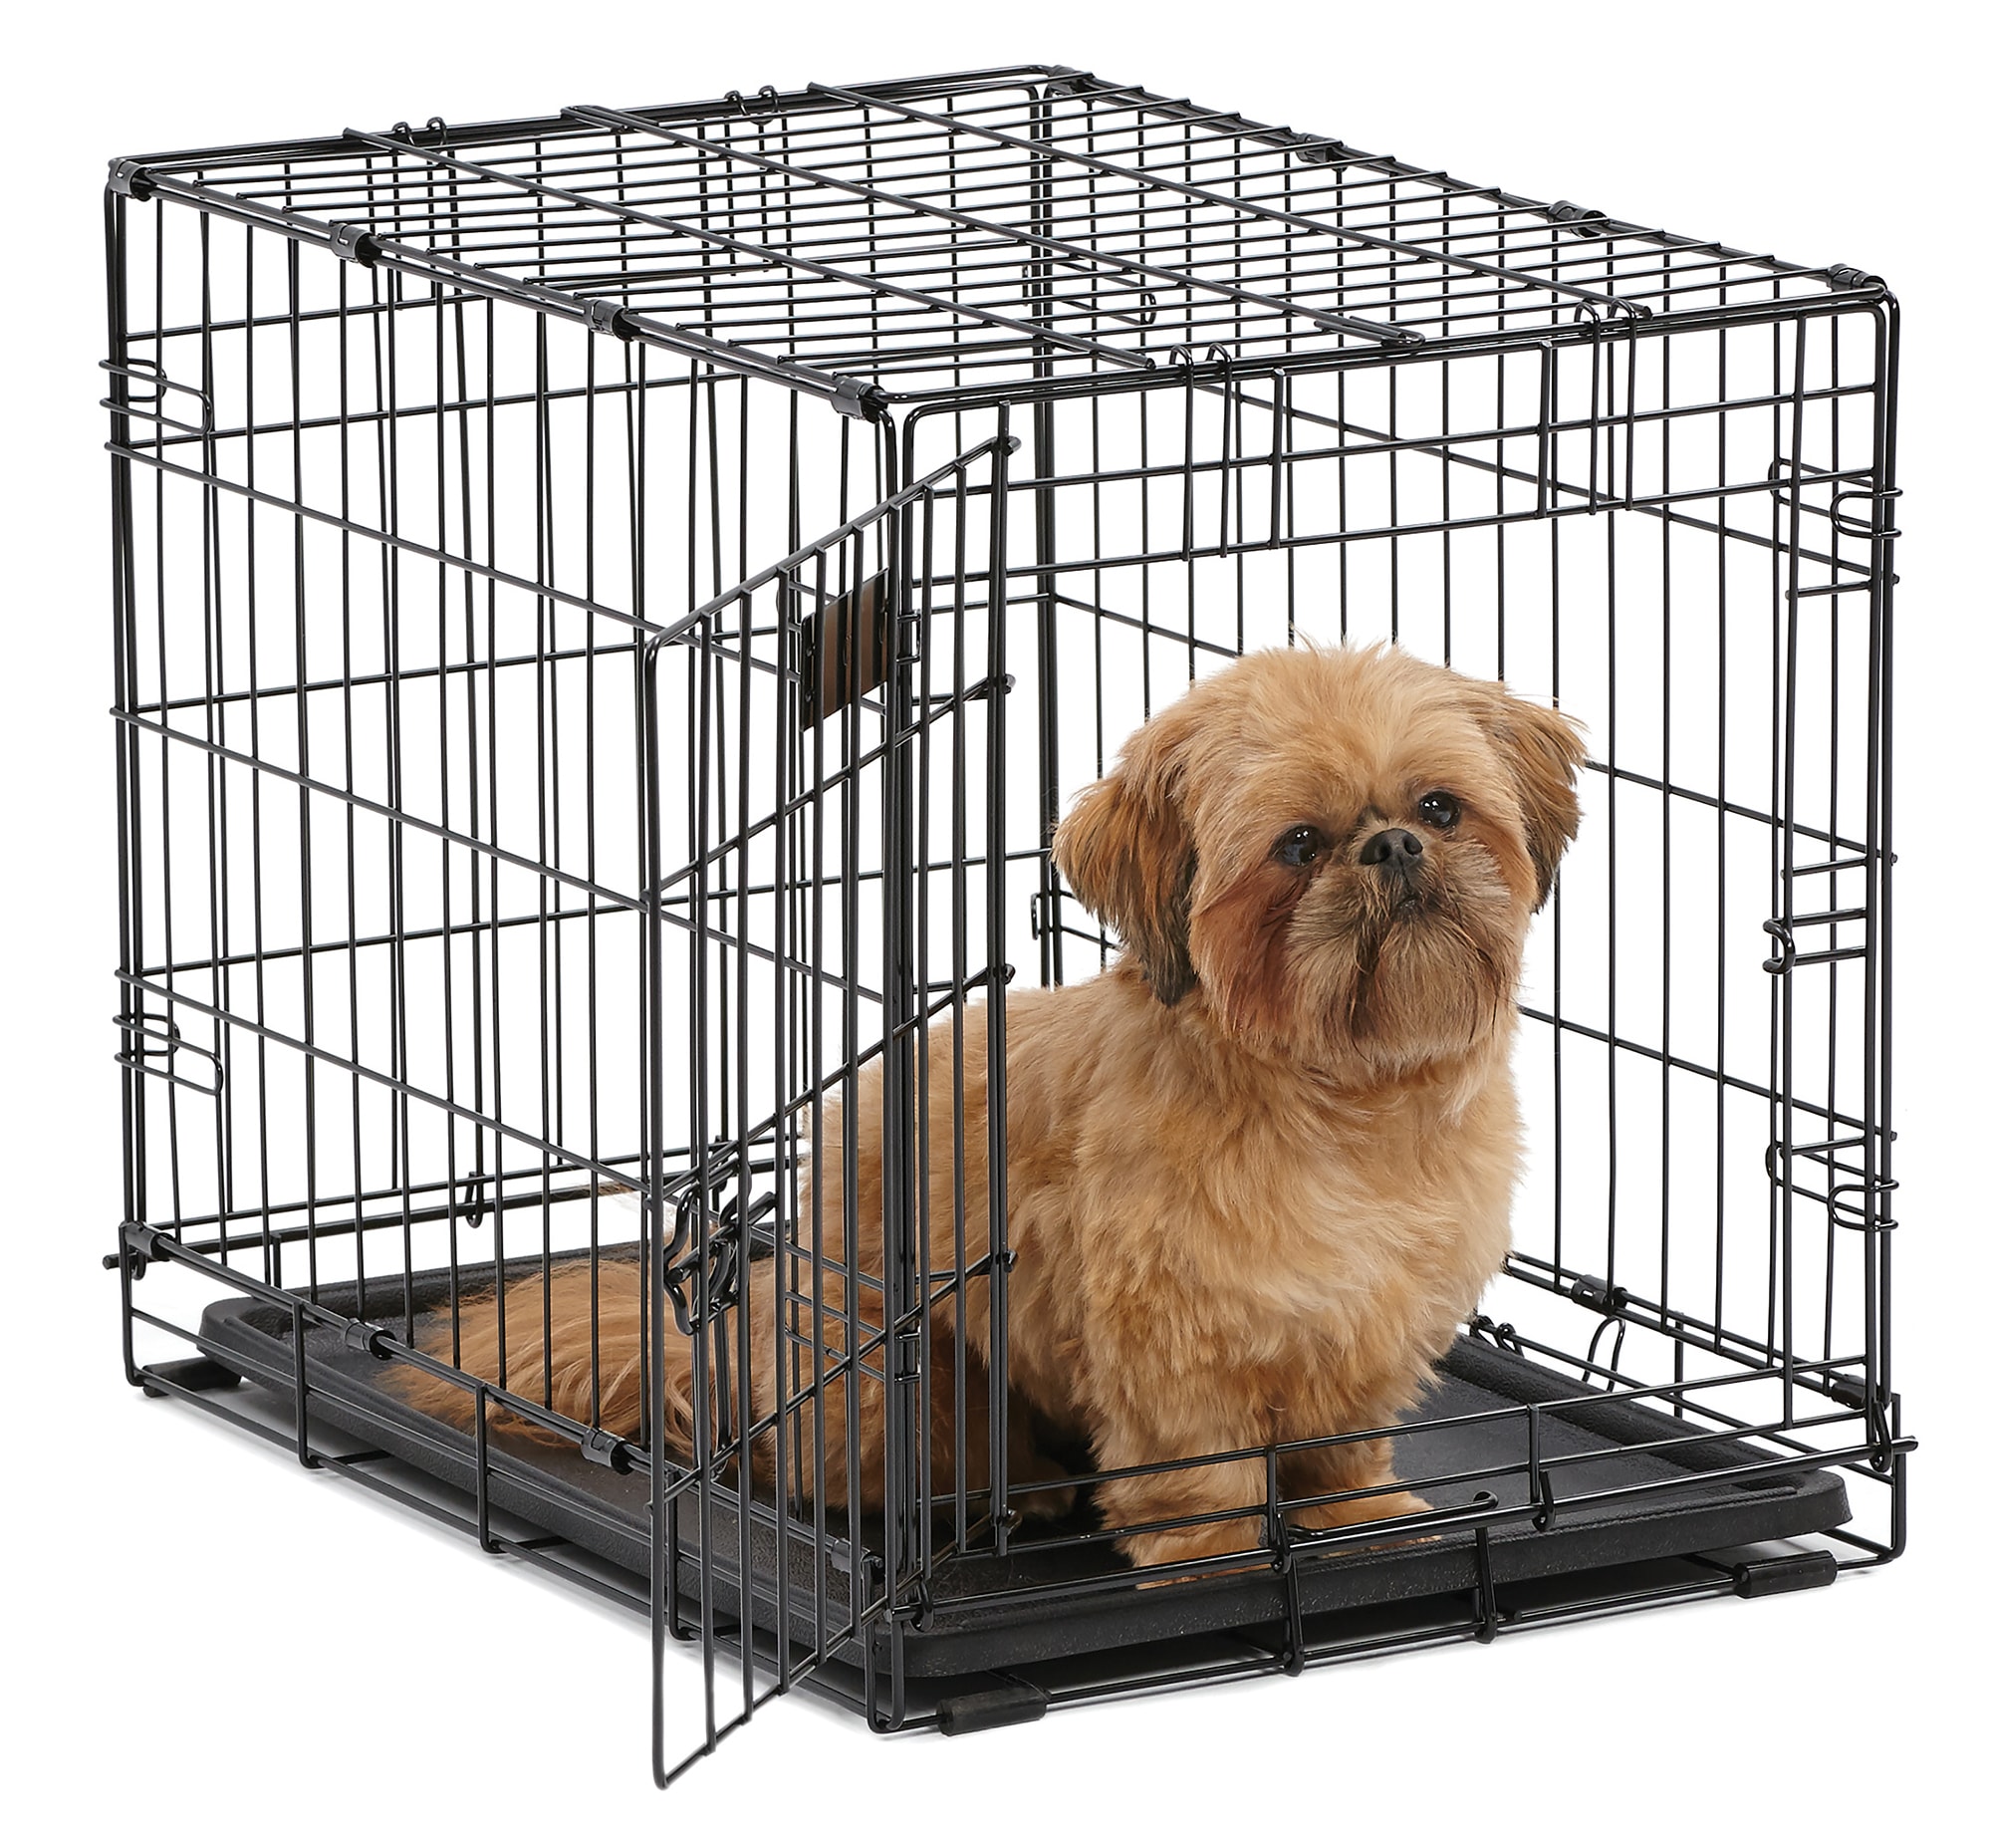 abc's of crate training